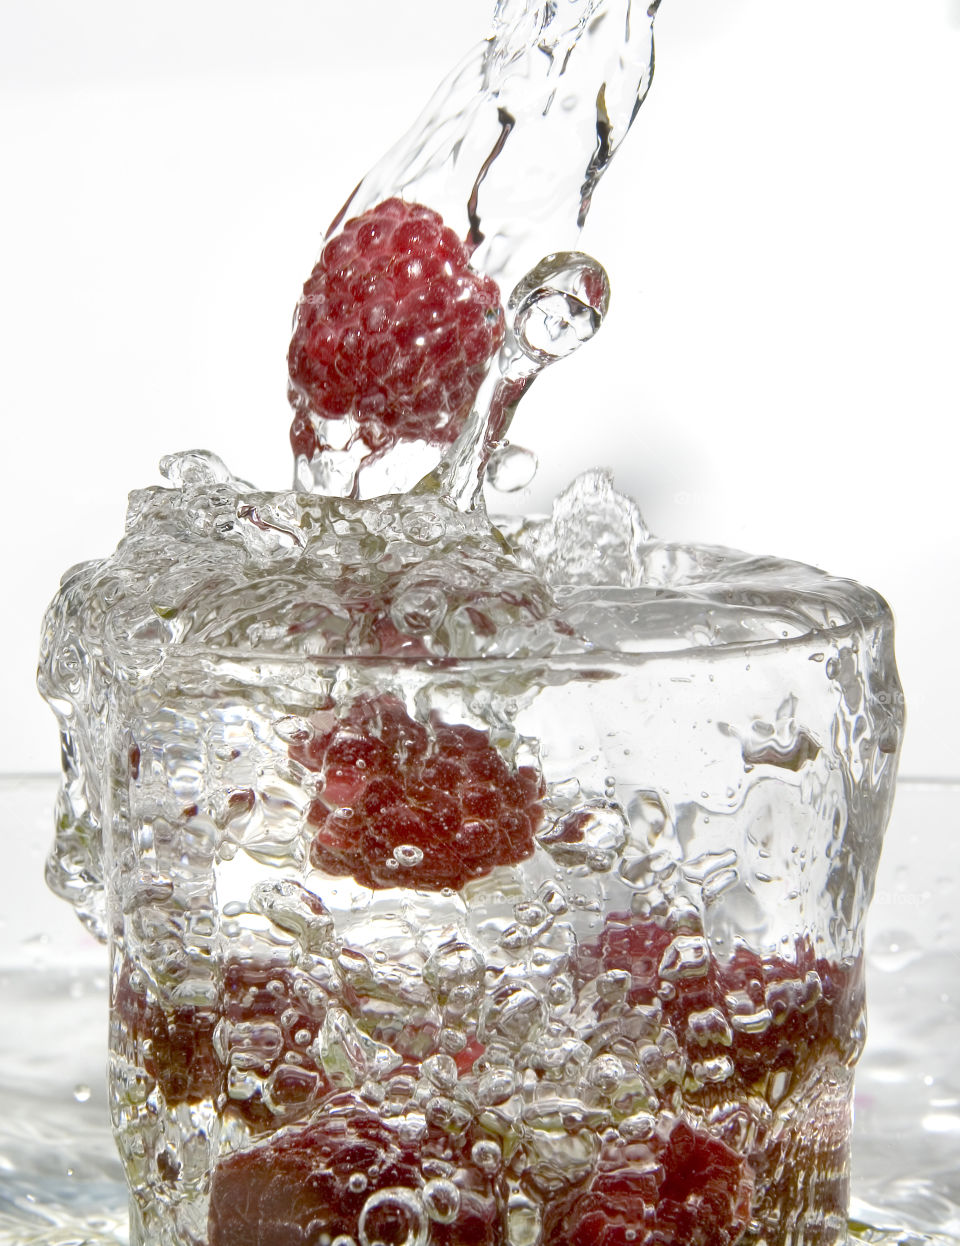 Raspberry in glass of water